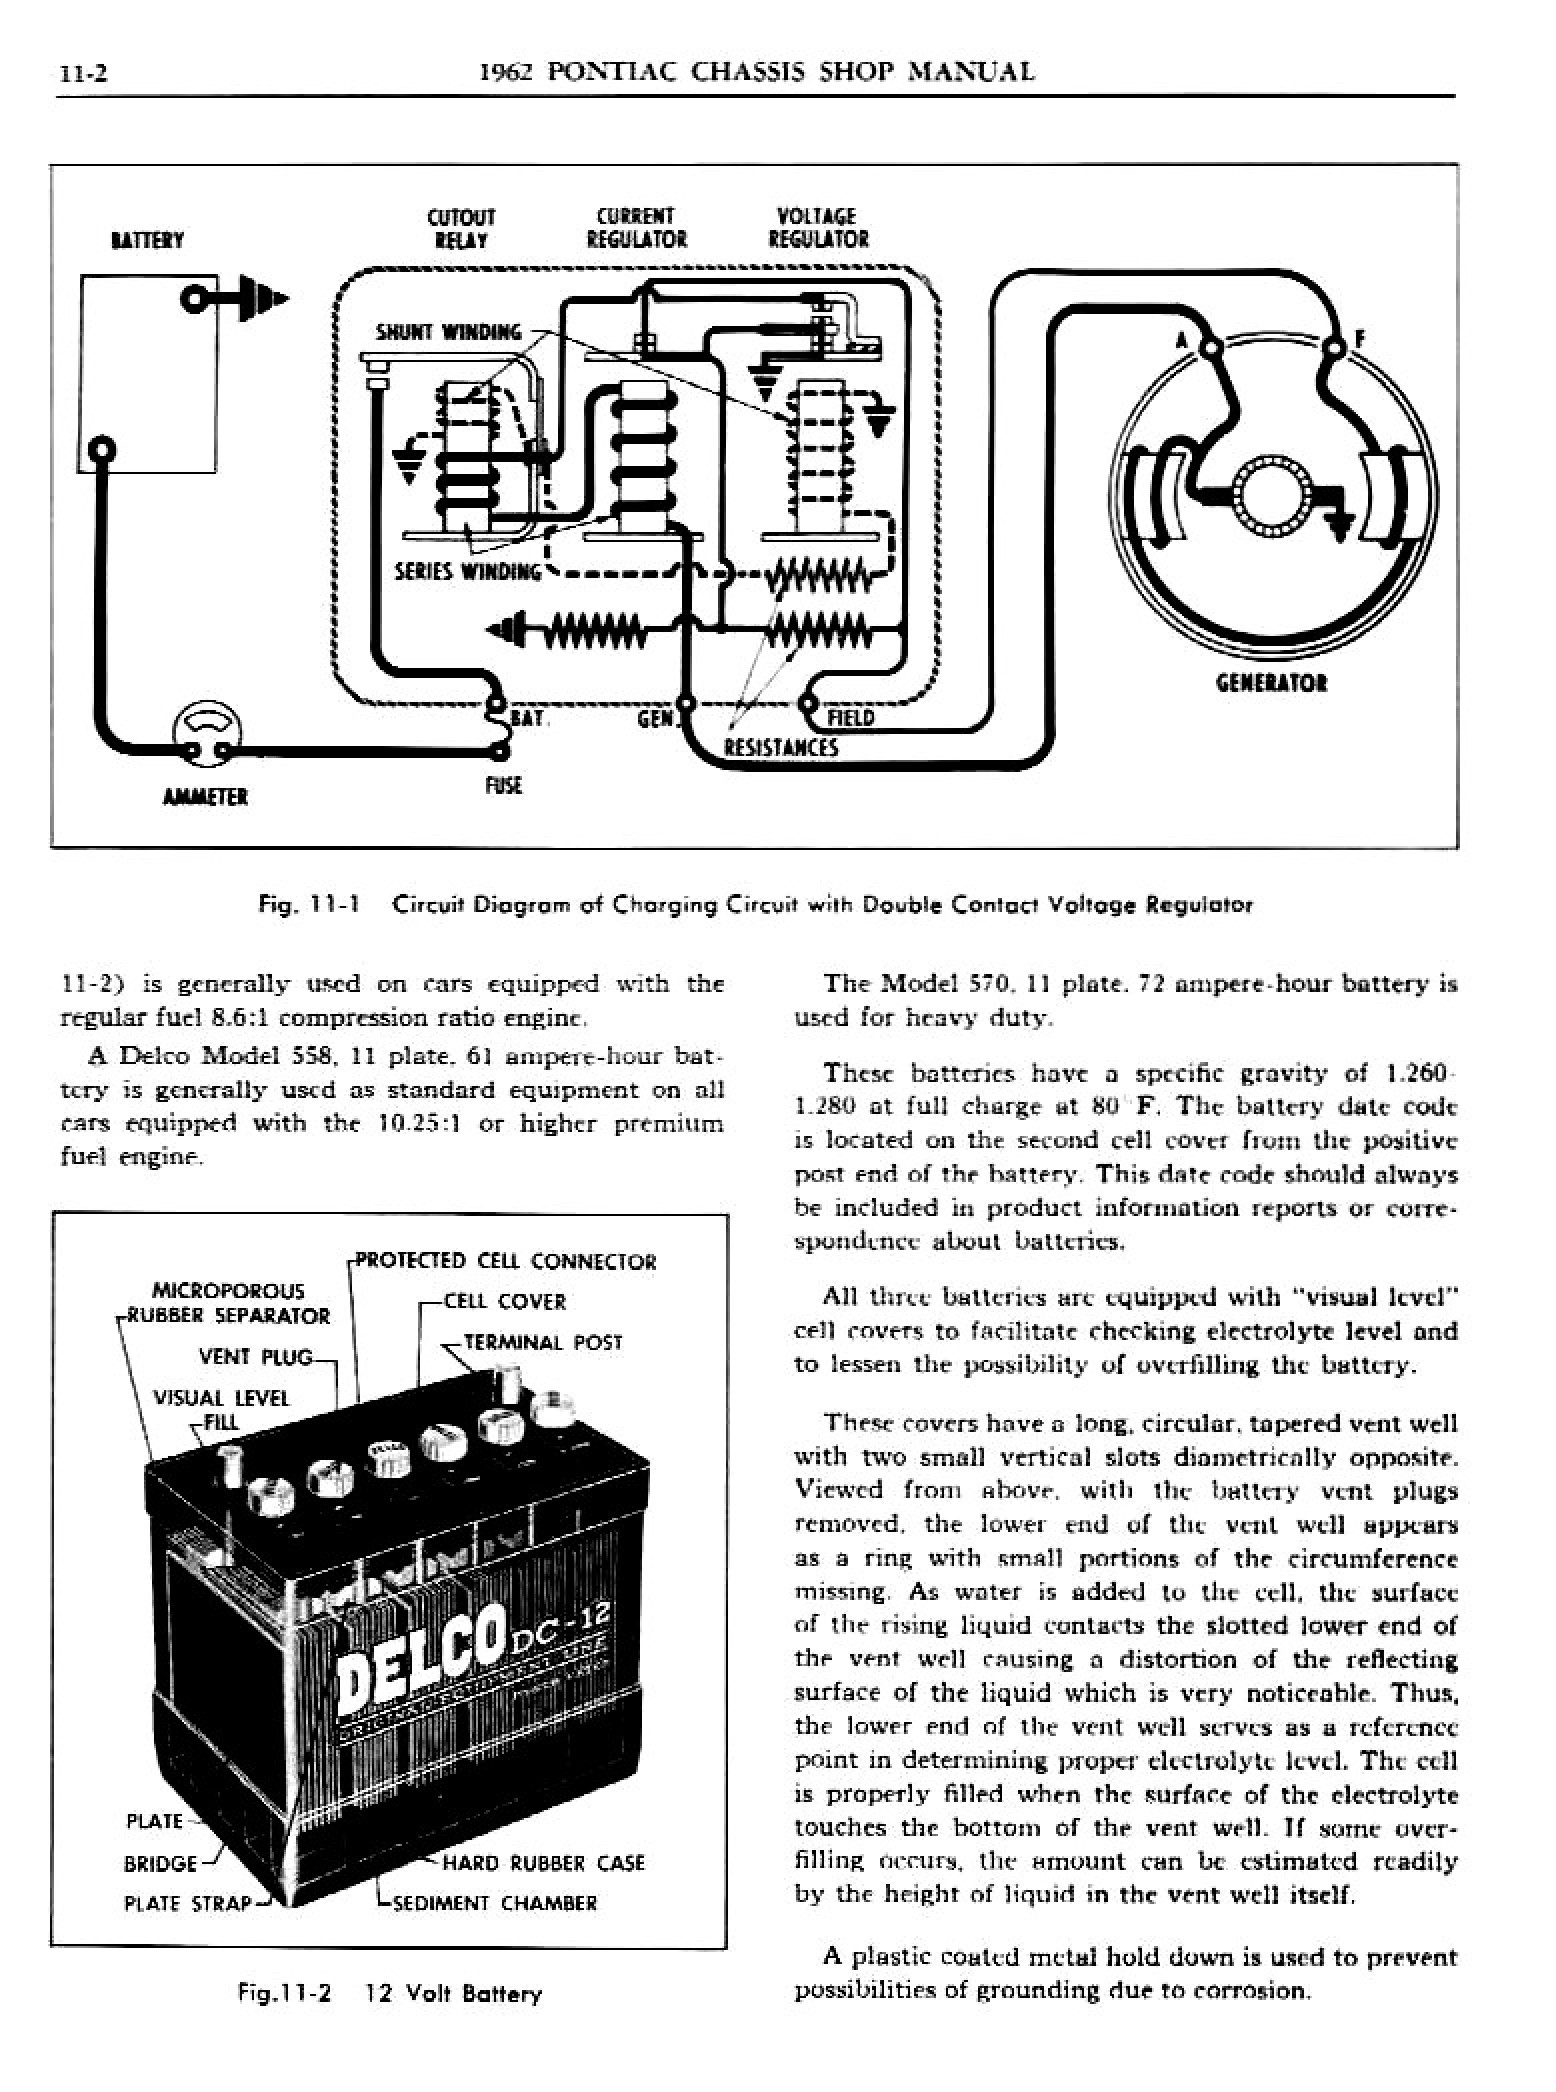 1962 Pontiac Chassis Service Manual- Electrical Page 2 of 89